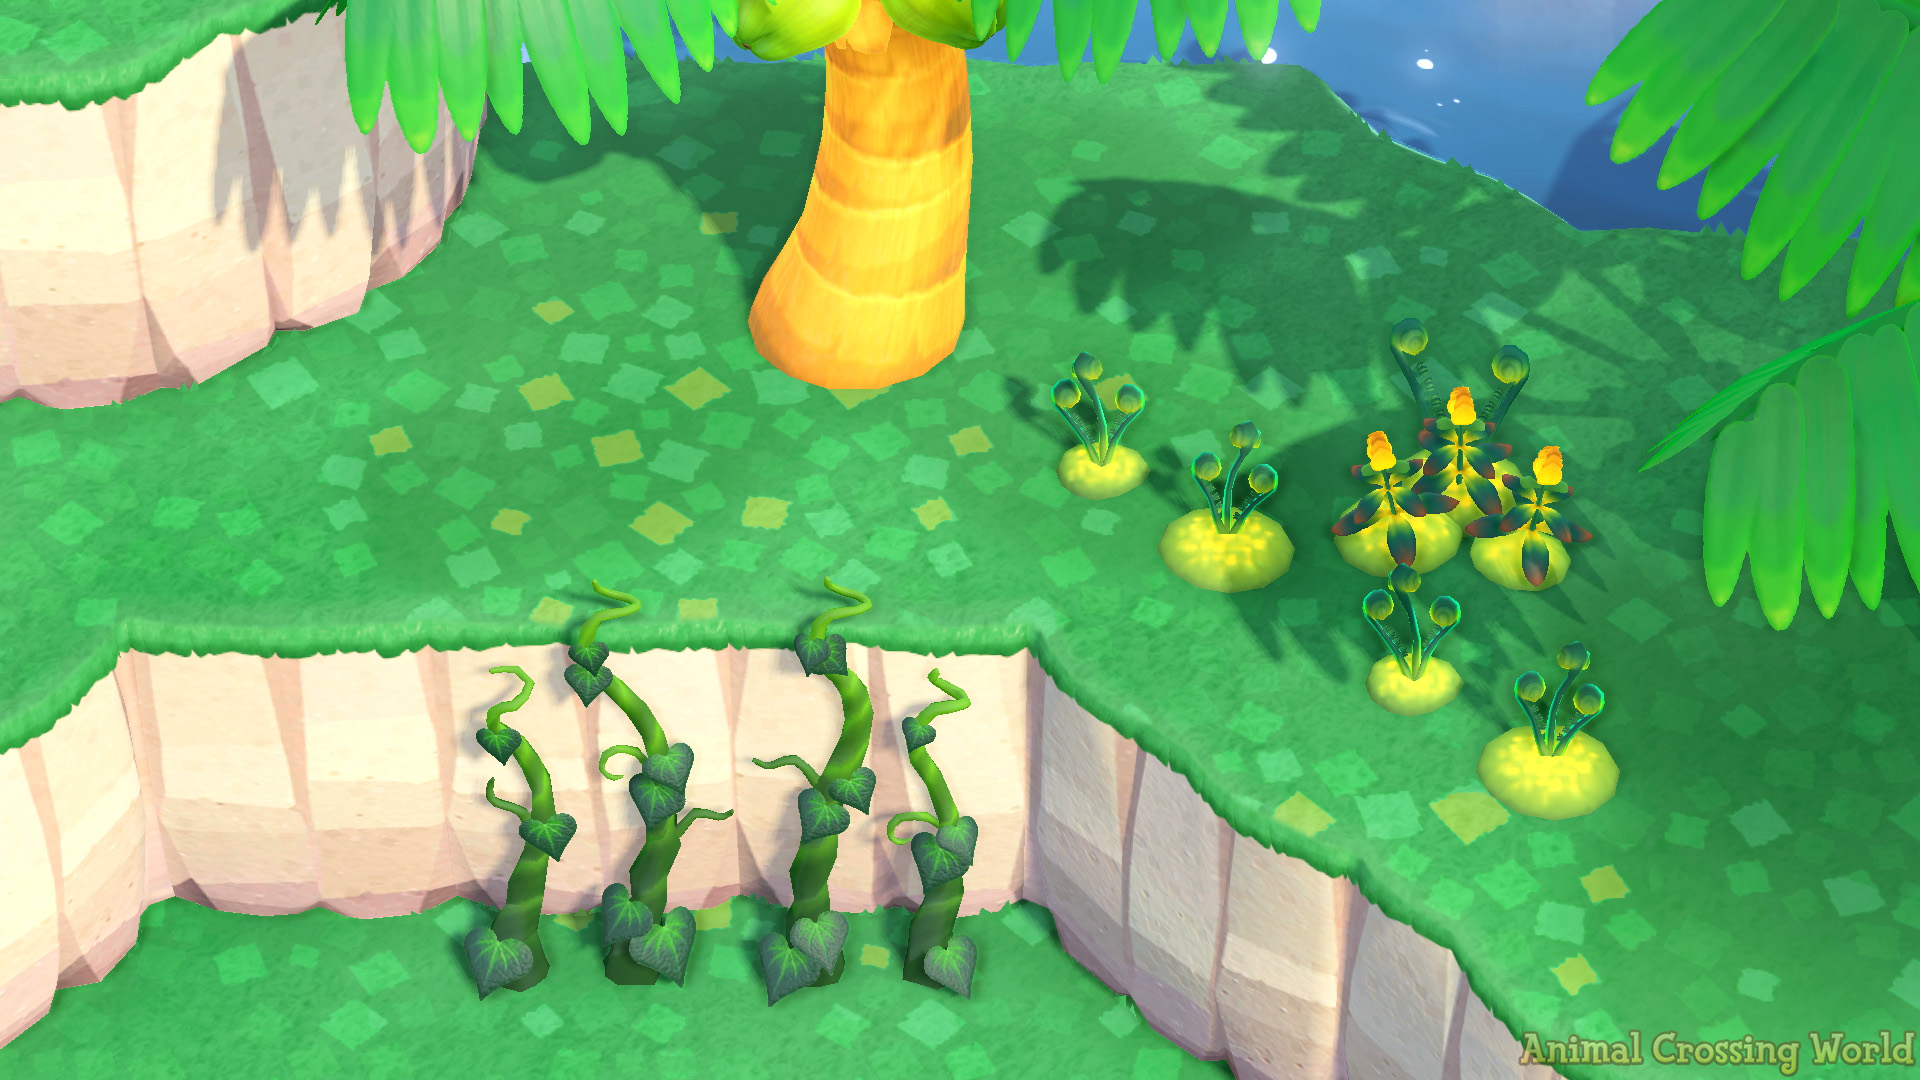 How To Get Vines & Glowing Moss + DIY Recipes Guide for Animal Crossing:  New Horizons